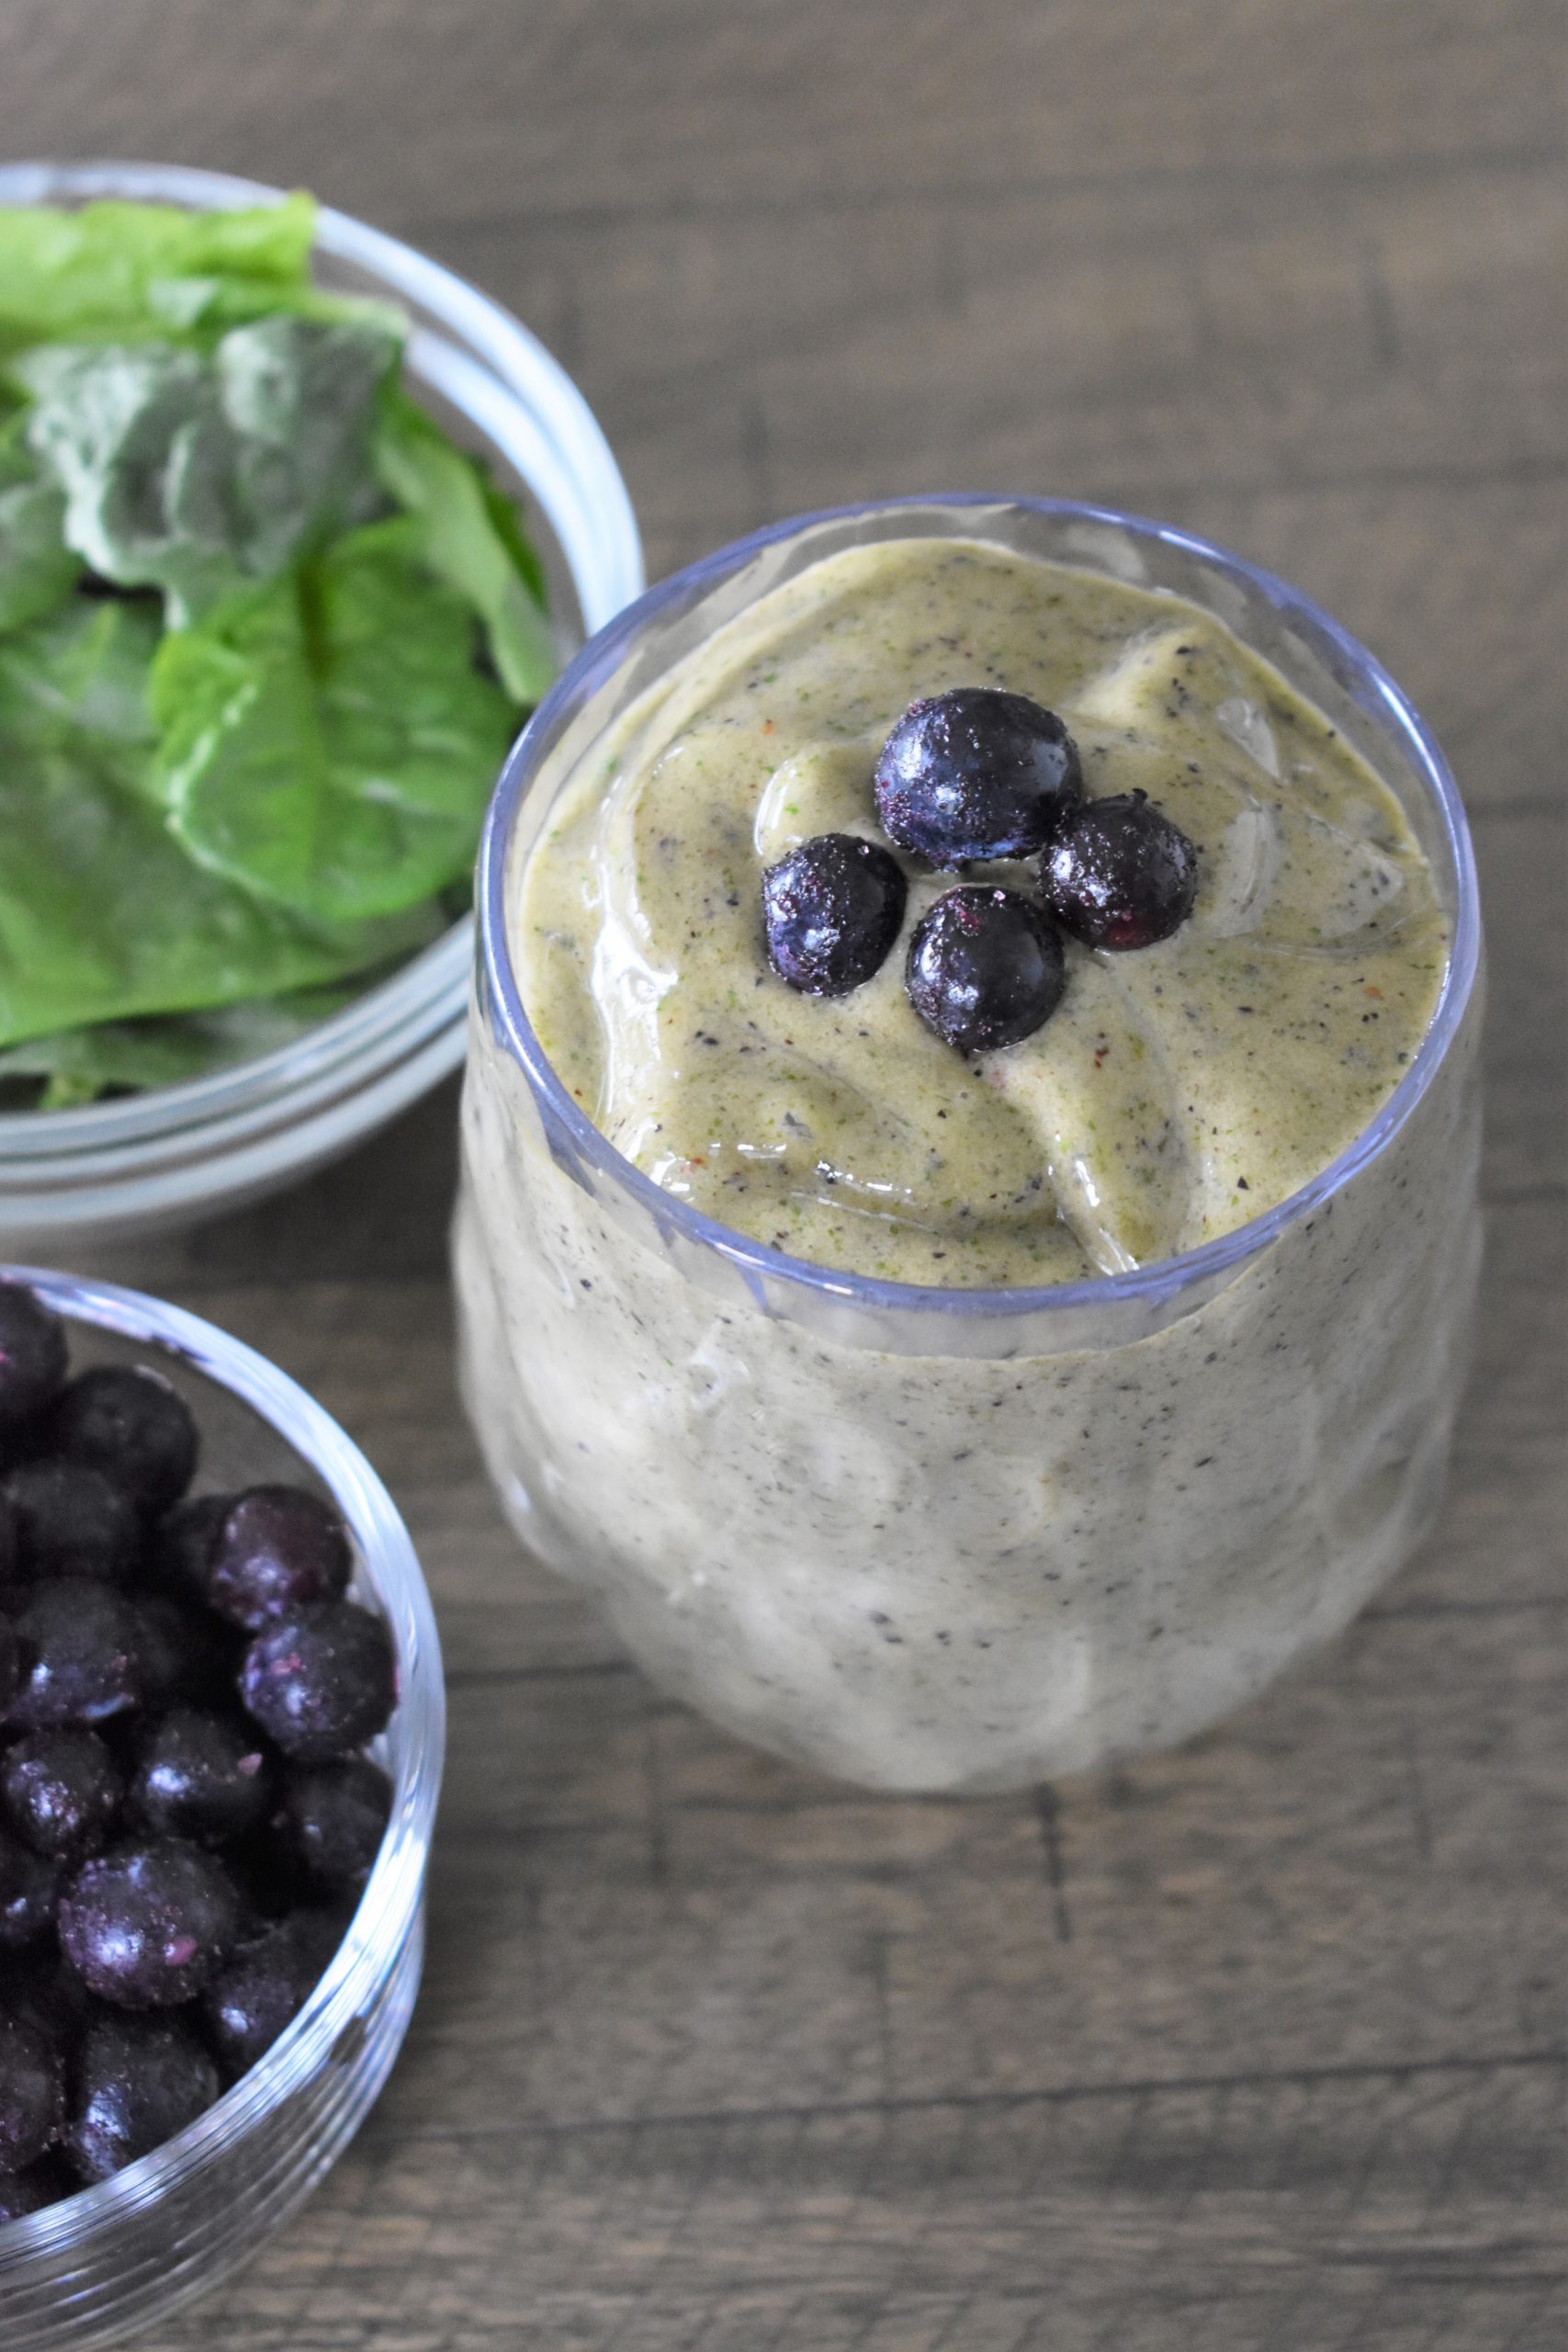 The Green Spinach Smoothie topped with more blueberries.